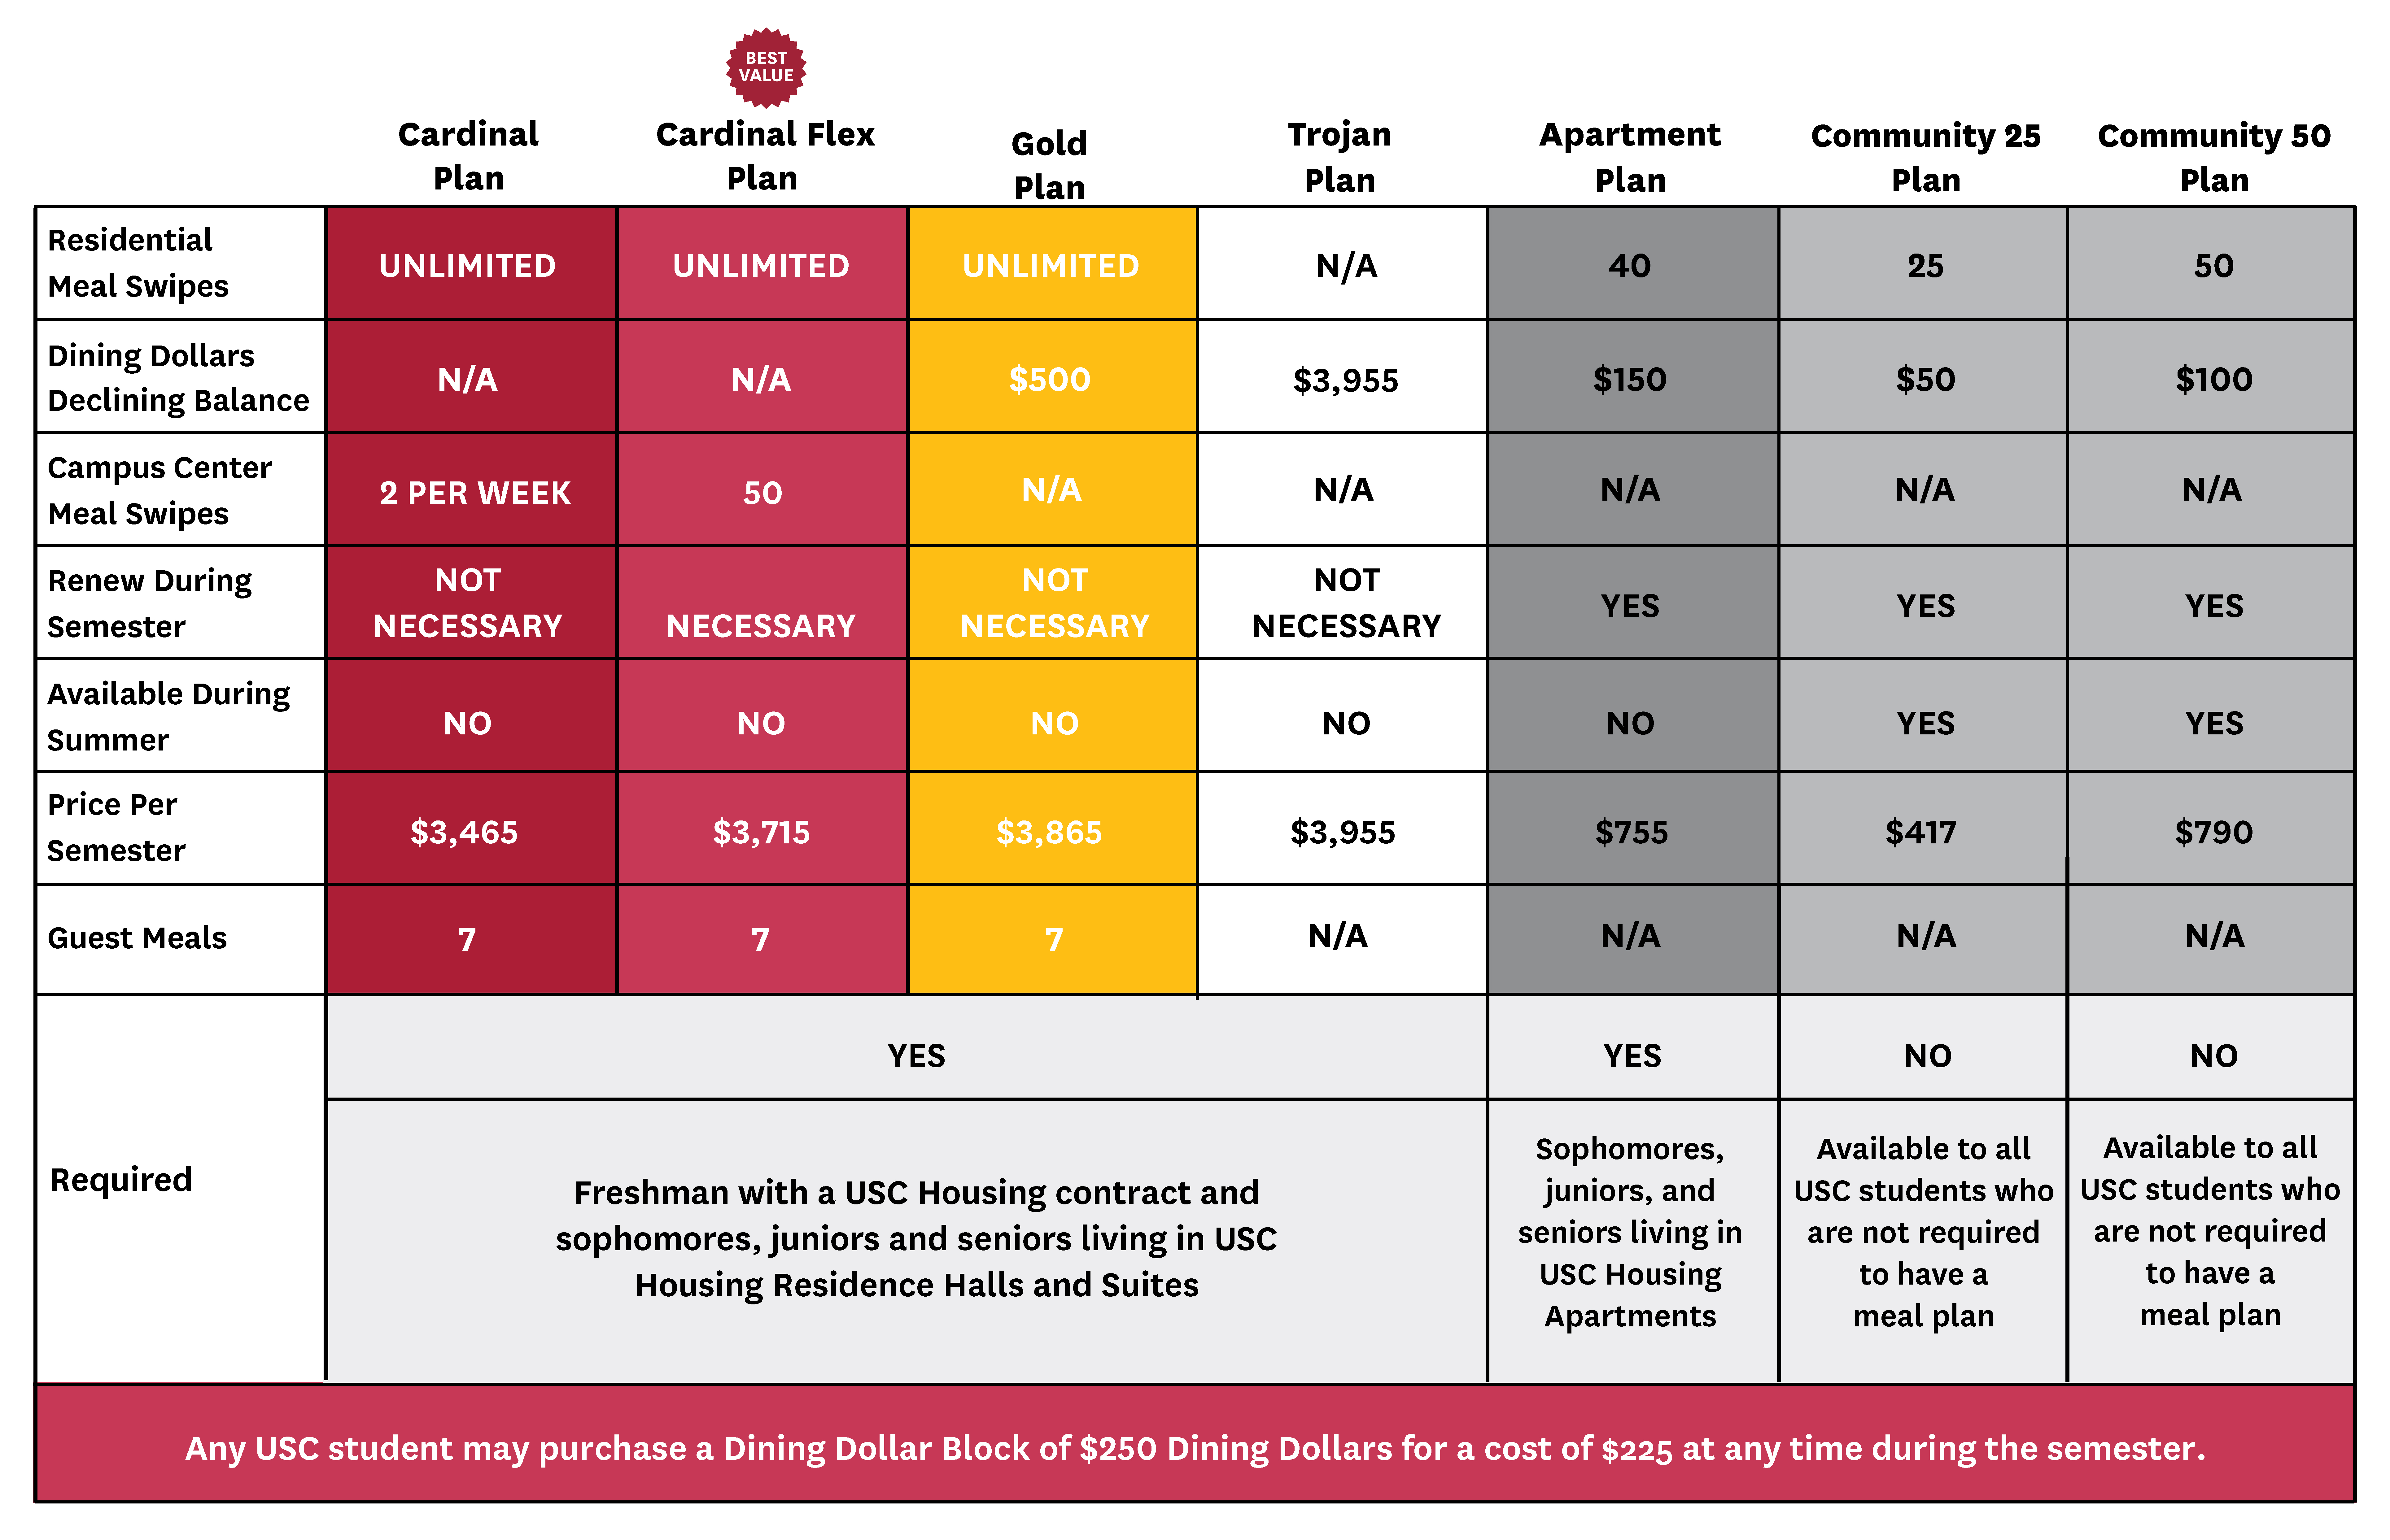 Grid showing a comparison between the various USC Hospitality Meal Plans for Fall 2022 & Spring 2023